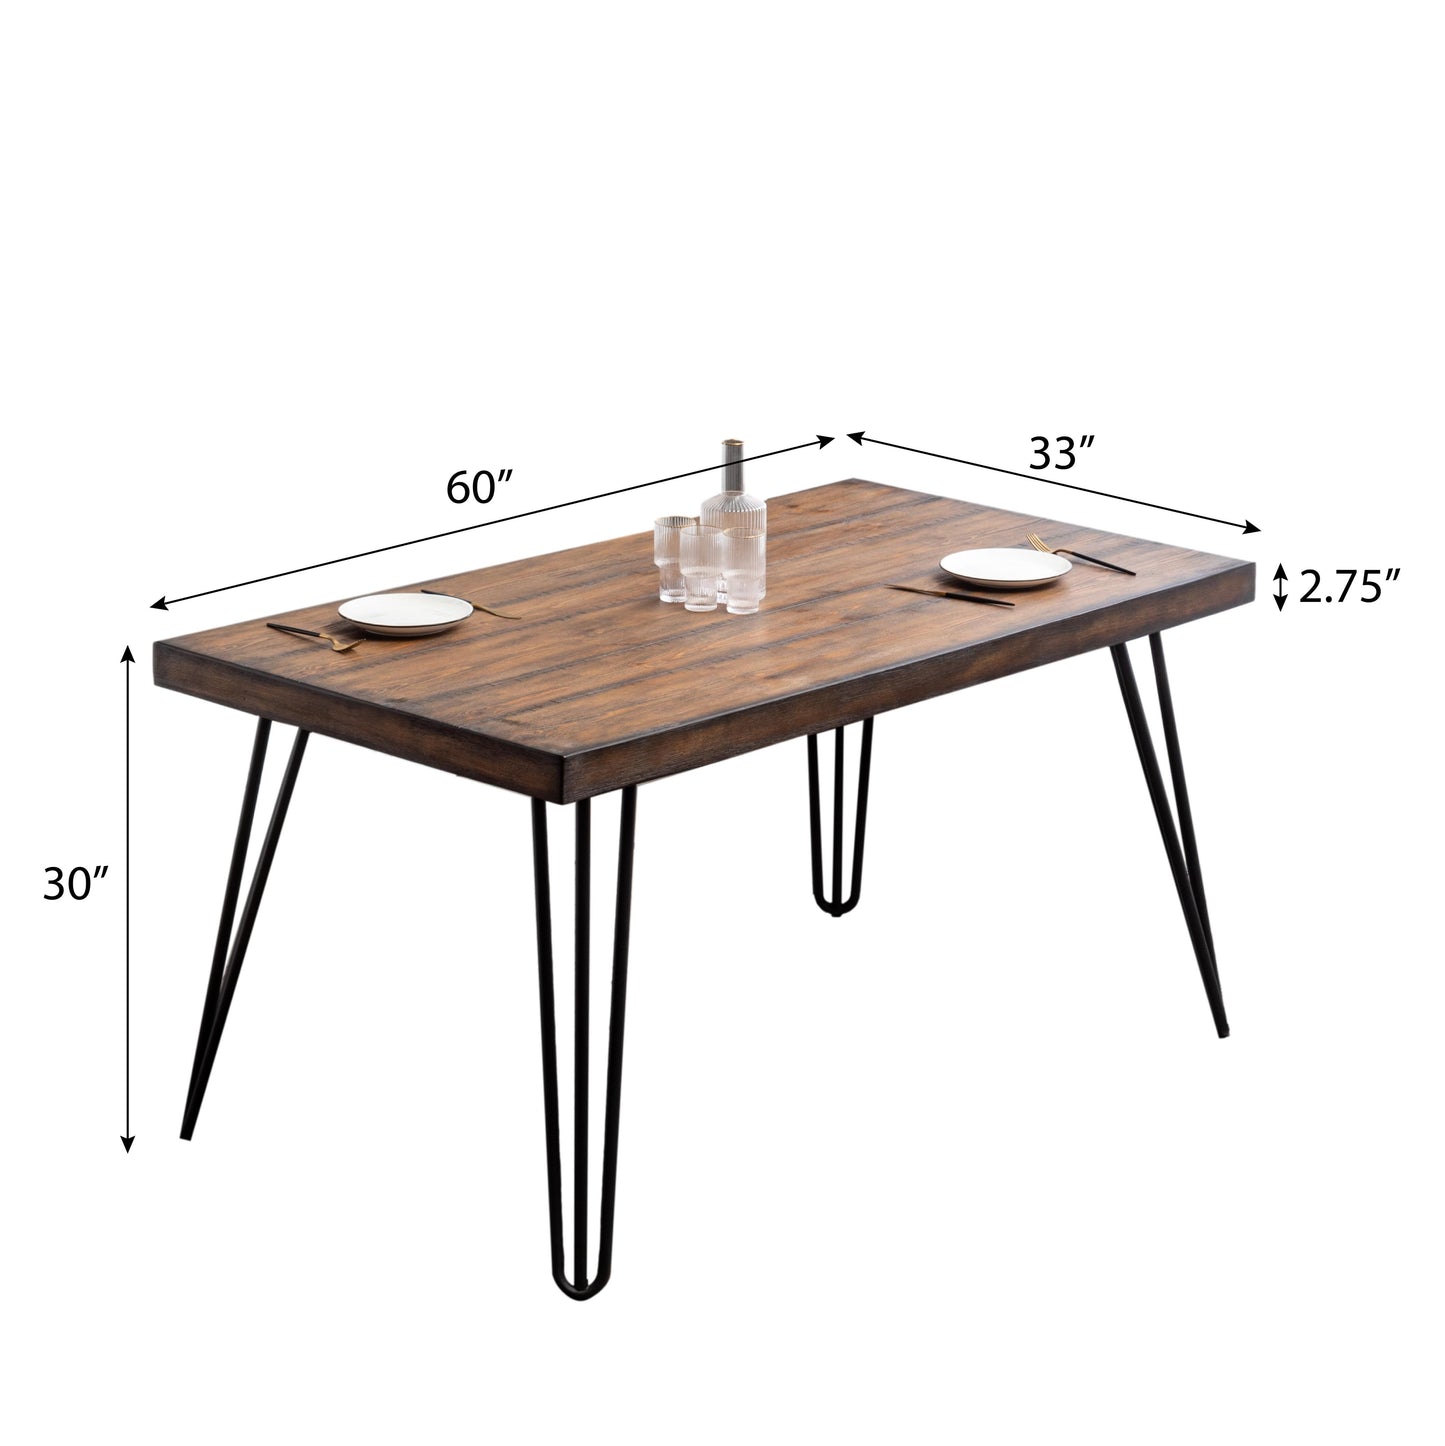 Amisos 6-Piece Dining Set, Hairpin Dining Table with 4 Chairs and a Wood Bench, 3 Color Options